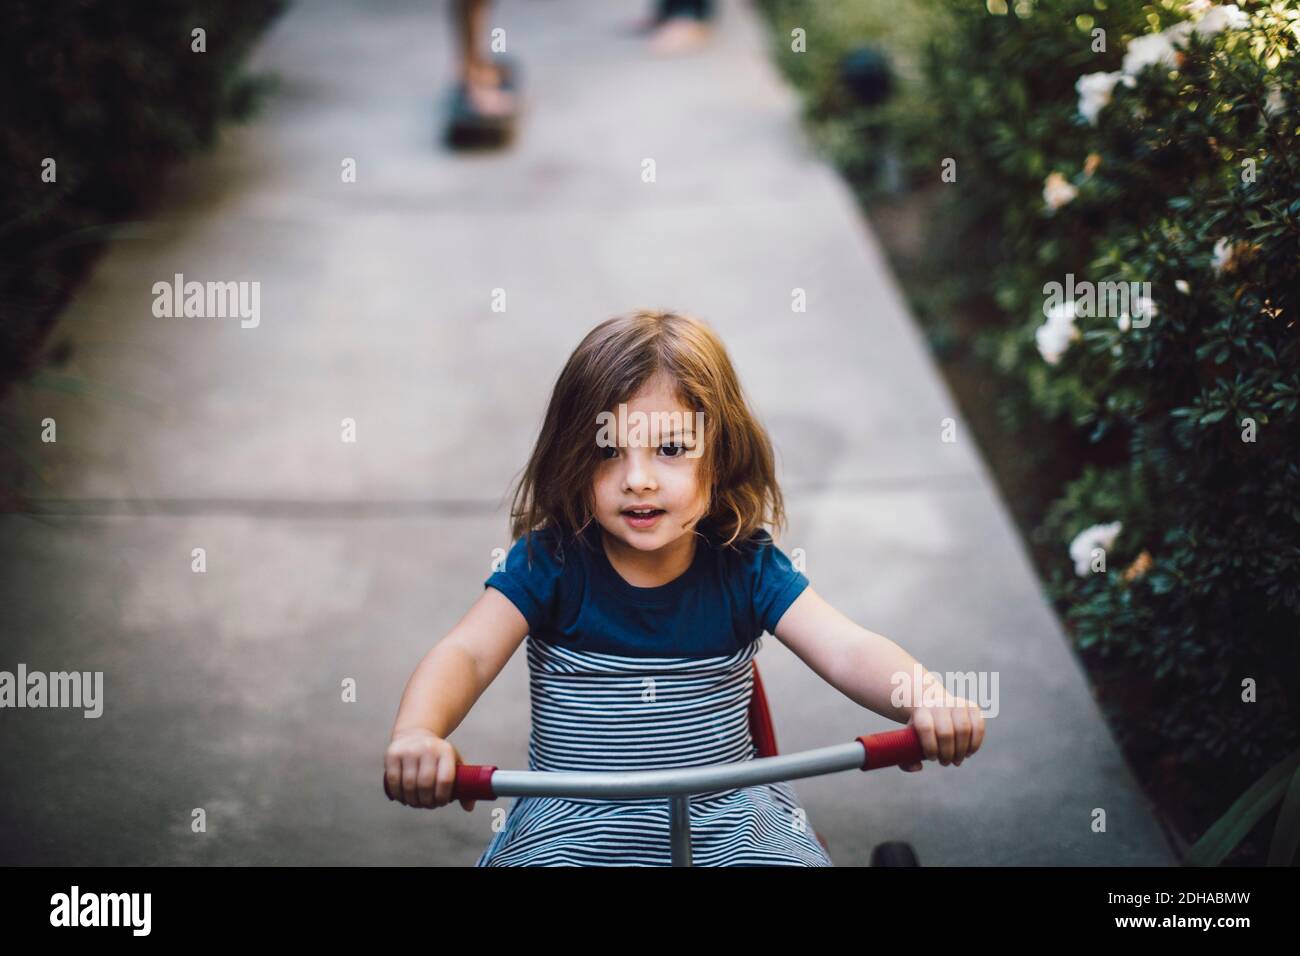 Girl riding tricycle on footpath Stock Photo